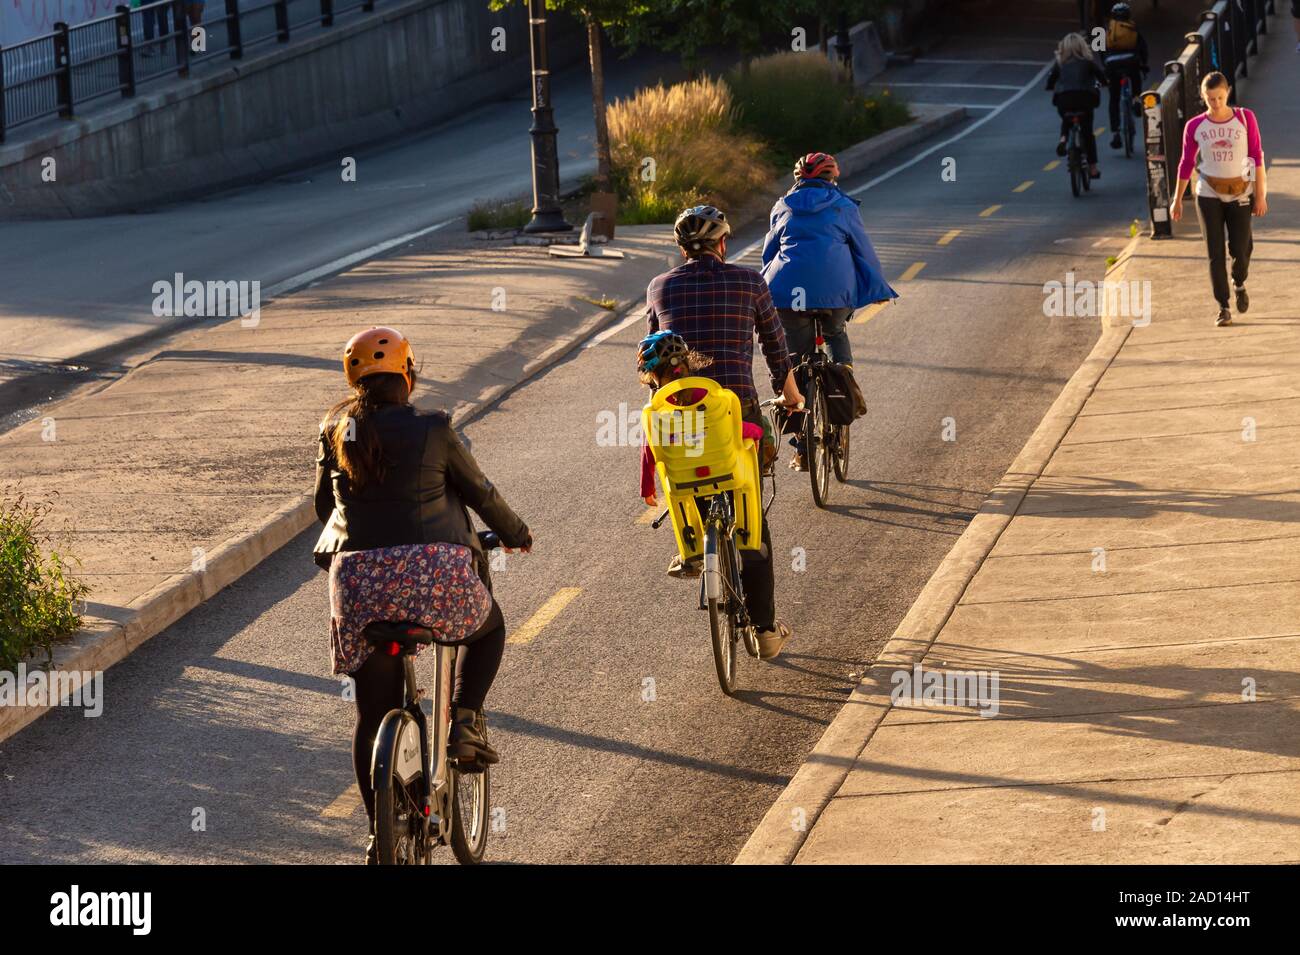 Montreal, Canada - 19 September 2019: People riding bikes on a cycle path, on Saint Laurent Boulevard. Stock Photo